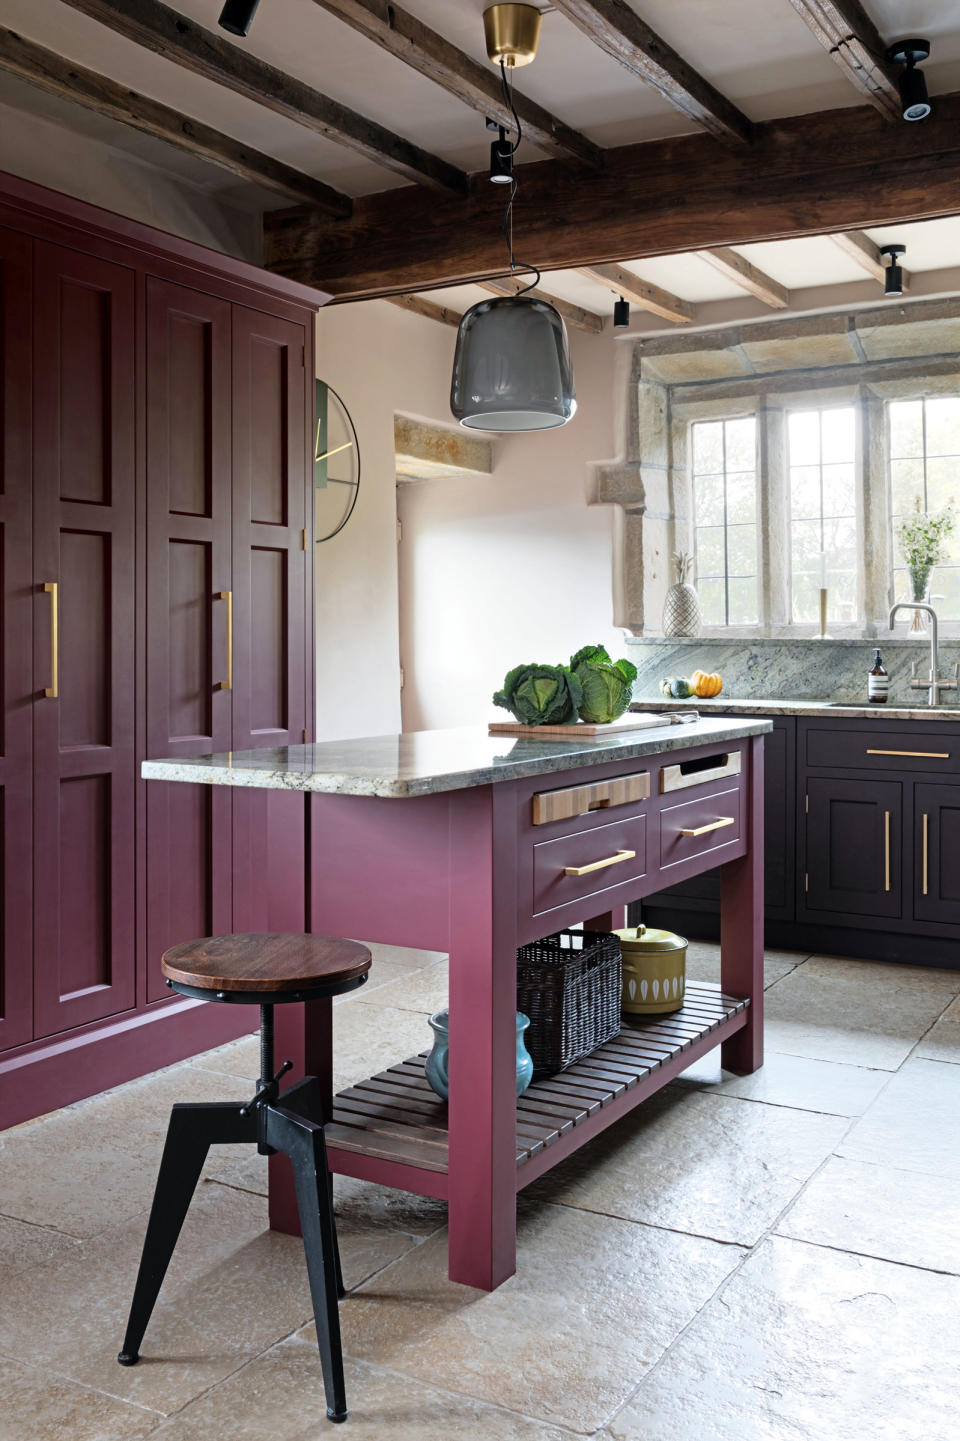 Opt for berry shades in traditional spaces